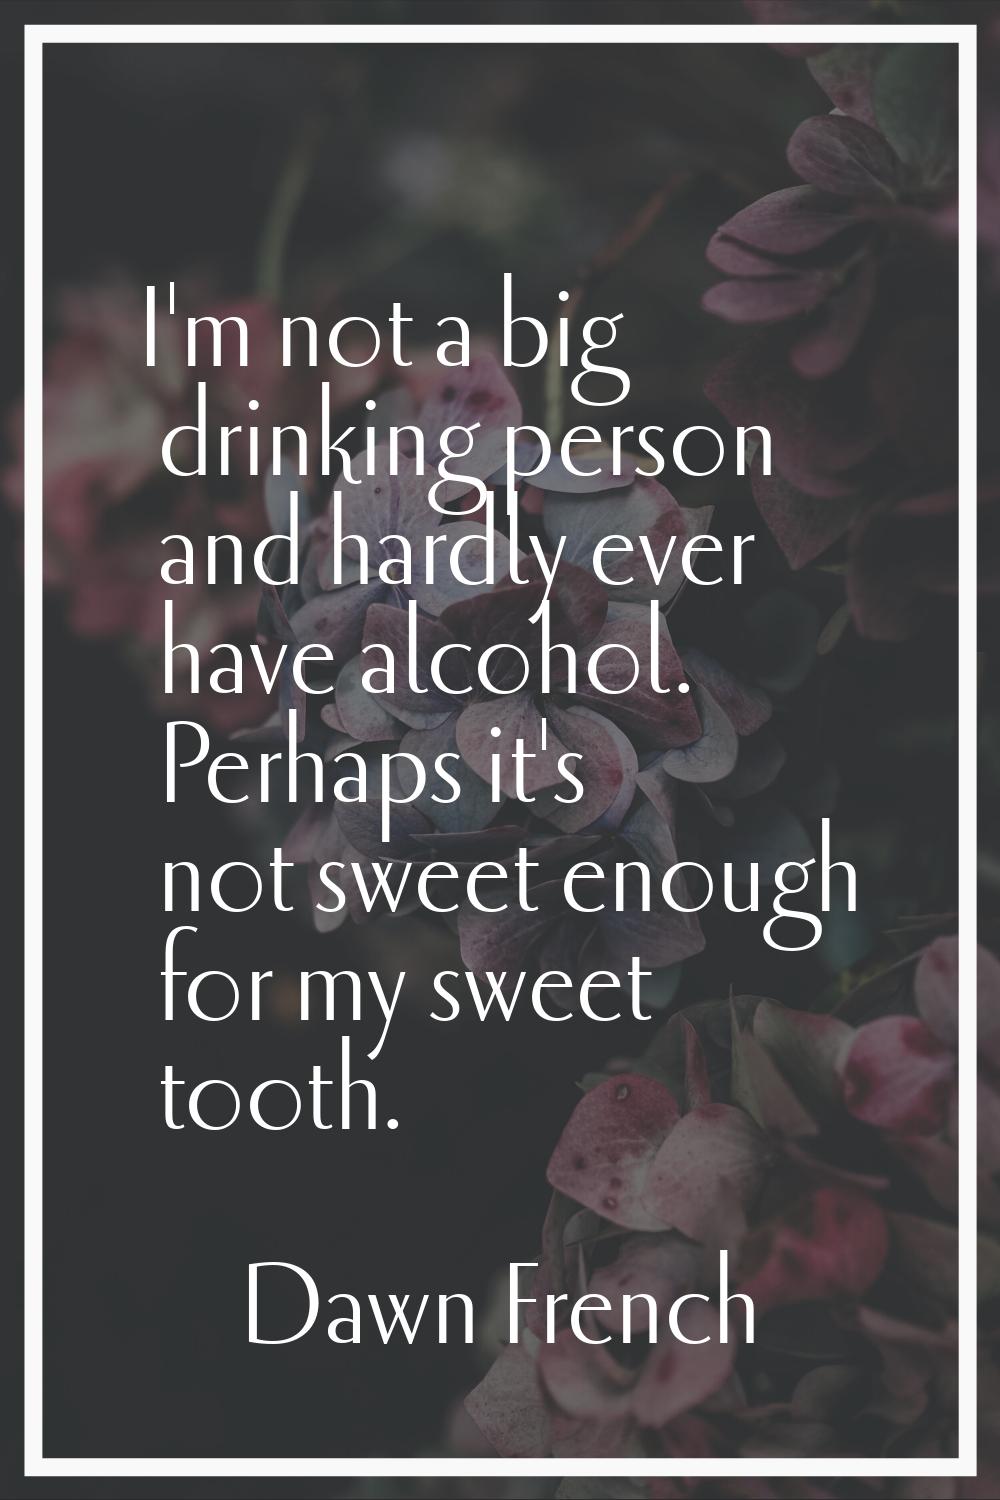 I'm not a big drinking person and hardly ever have alcohol. Perhaps it's not sweet enough for my sw